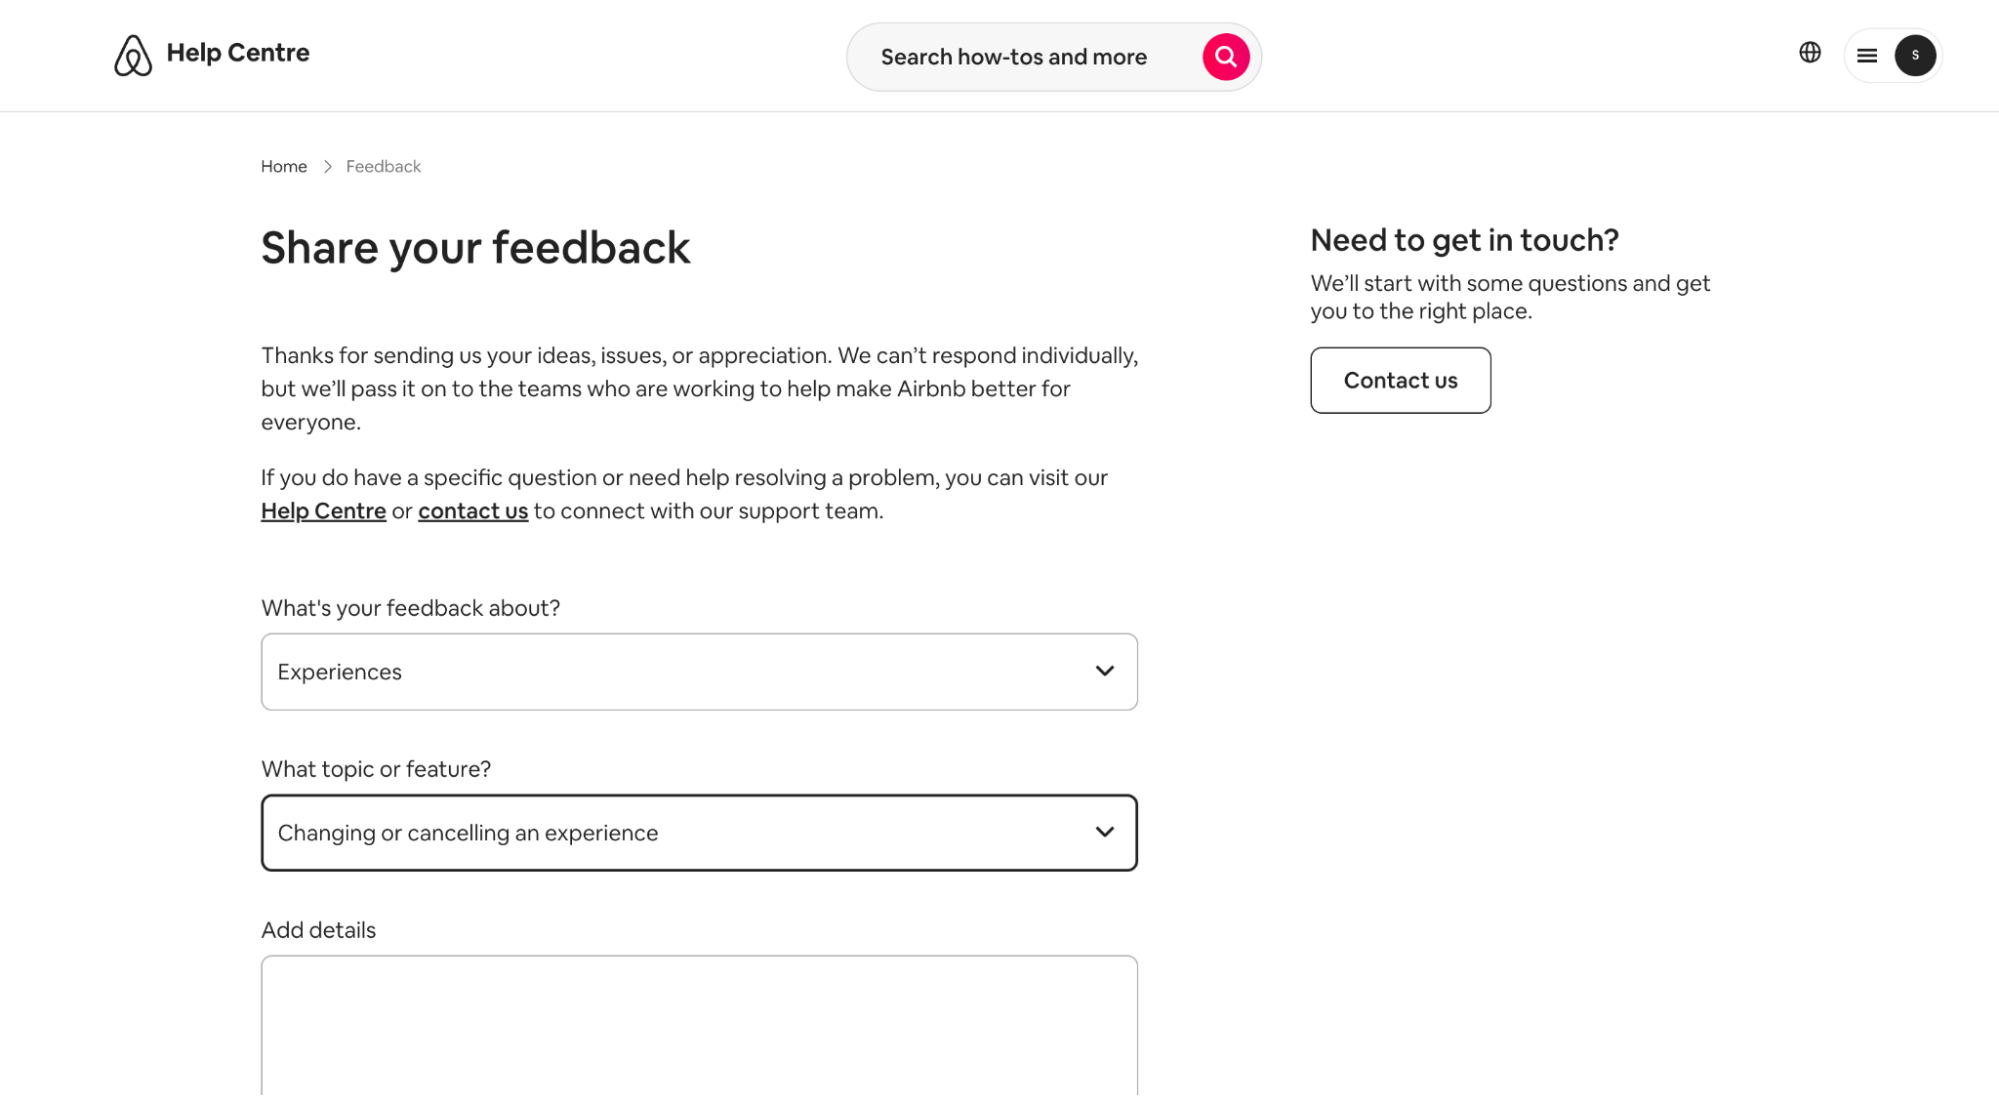 Airbnb asking for feedback on their website